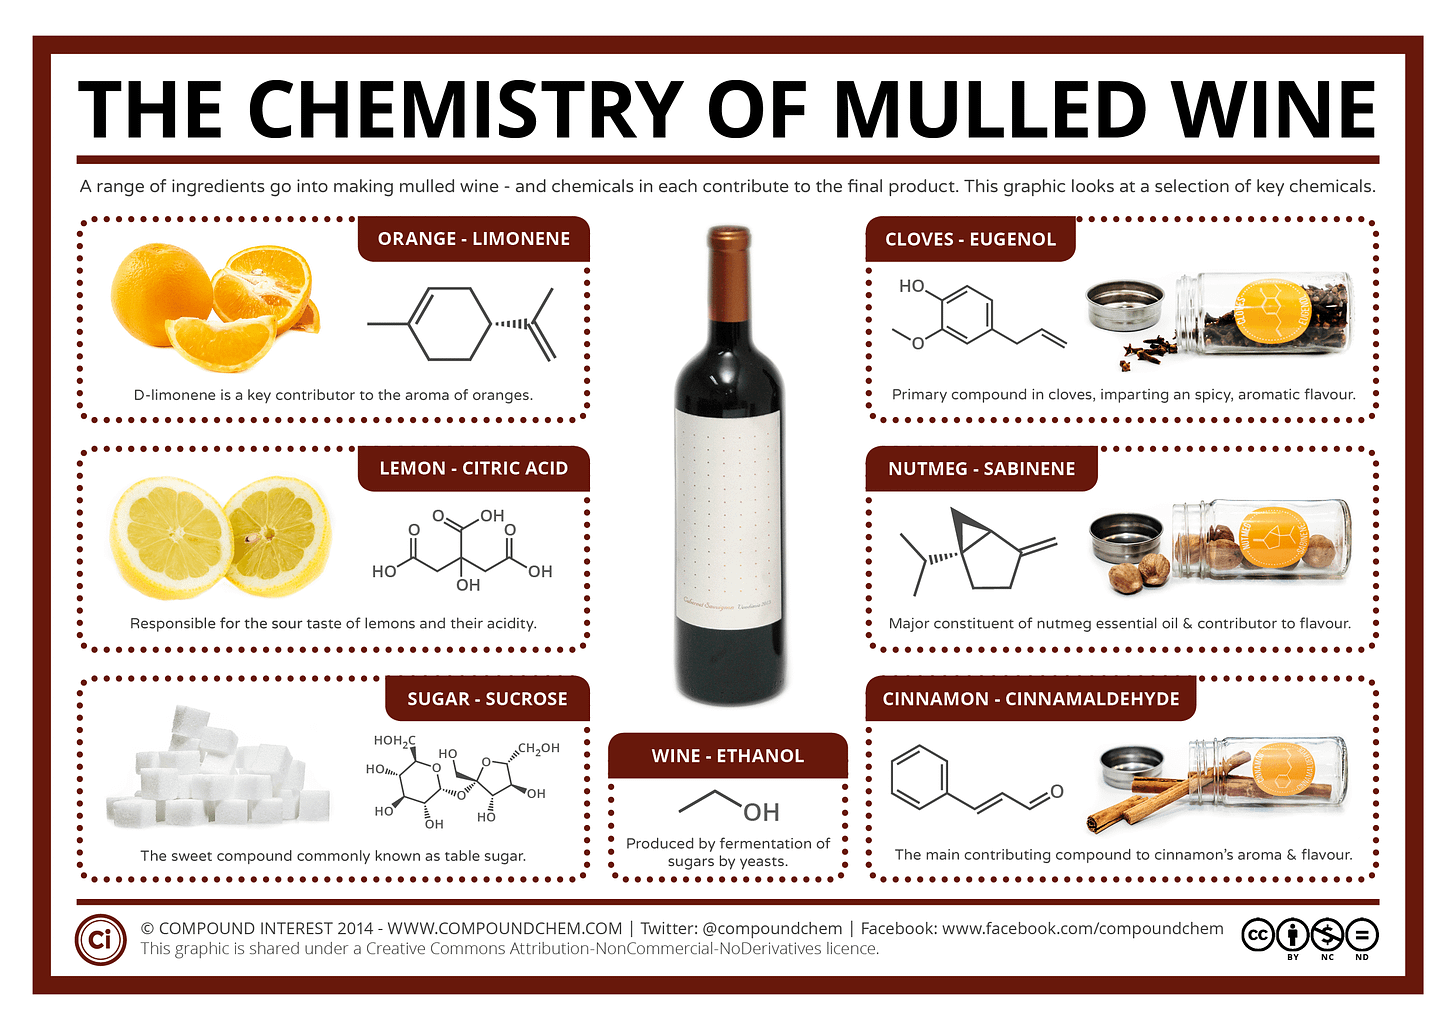 Infographic on the chemistry of mulled wine, highlighting some key compounds in each of the key ingredients: ethanol in wine, limonene in orange, citric acid in lemons, sucrose in sugar, eugenol in cloves, sabinene in nutmeg and cinnamaldehyde in cinnamon.